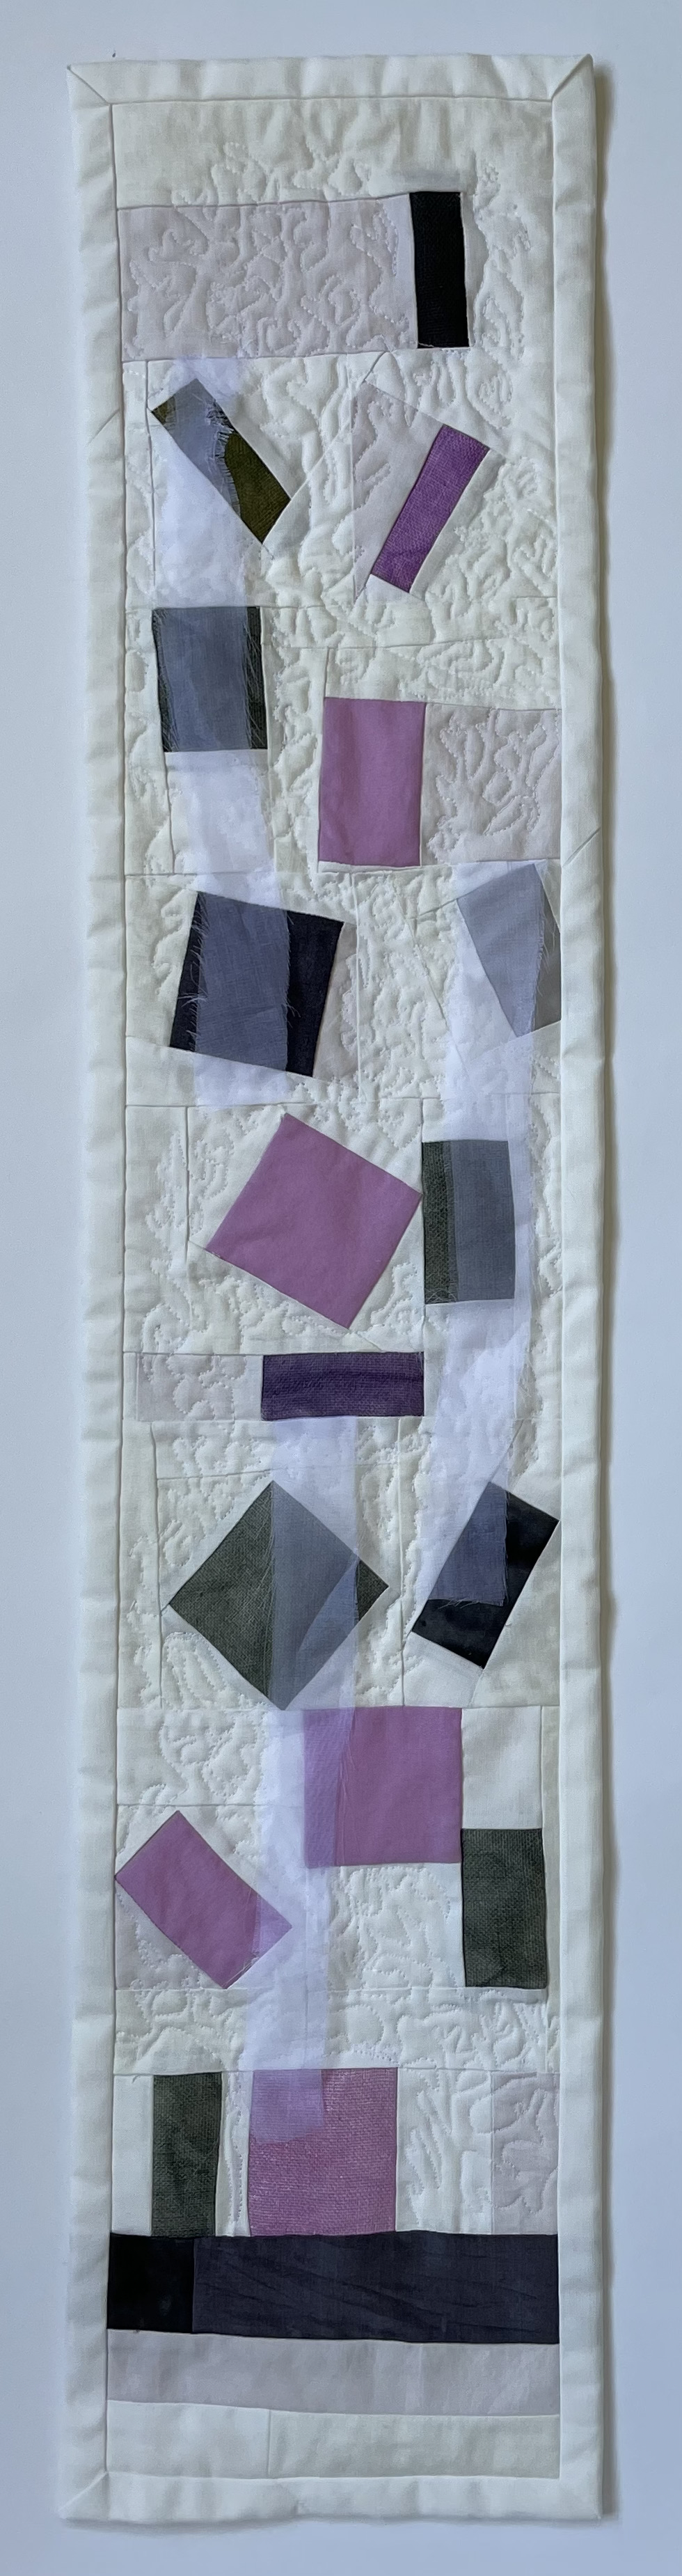 long narrow quilt with abstract shapes and three silk organza streamers sewn in